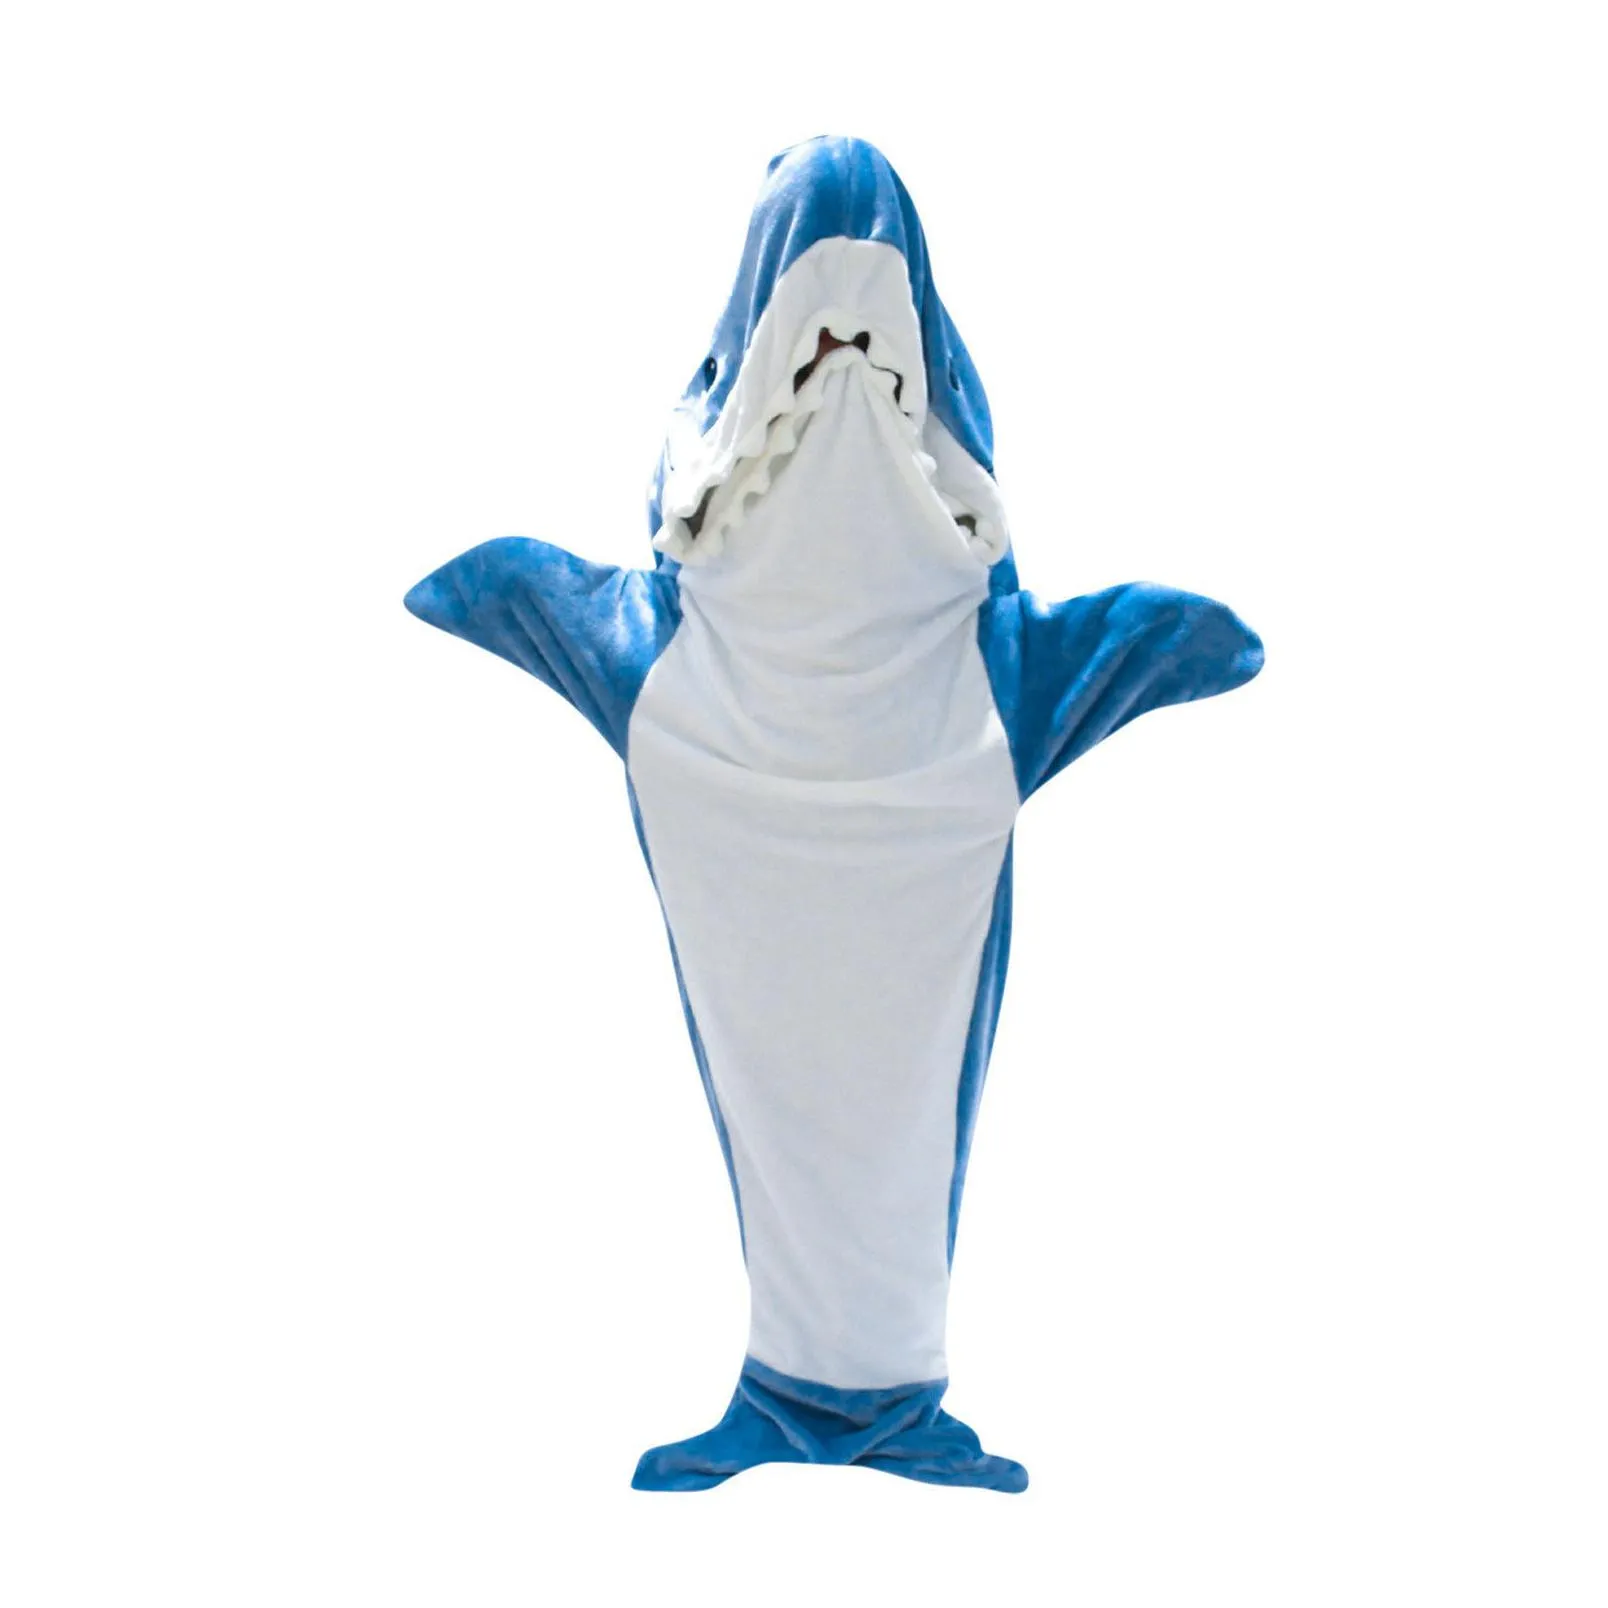 Blankets Blankets Soft Warm Shark Blanket For Adts With Hooded Design And Loose Jumpsuit 230809 Drop Delivery Home Garden Home Textile Dhnwy